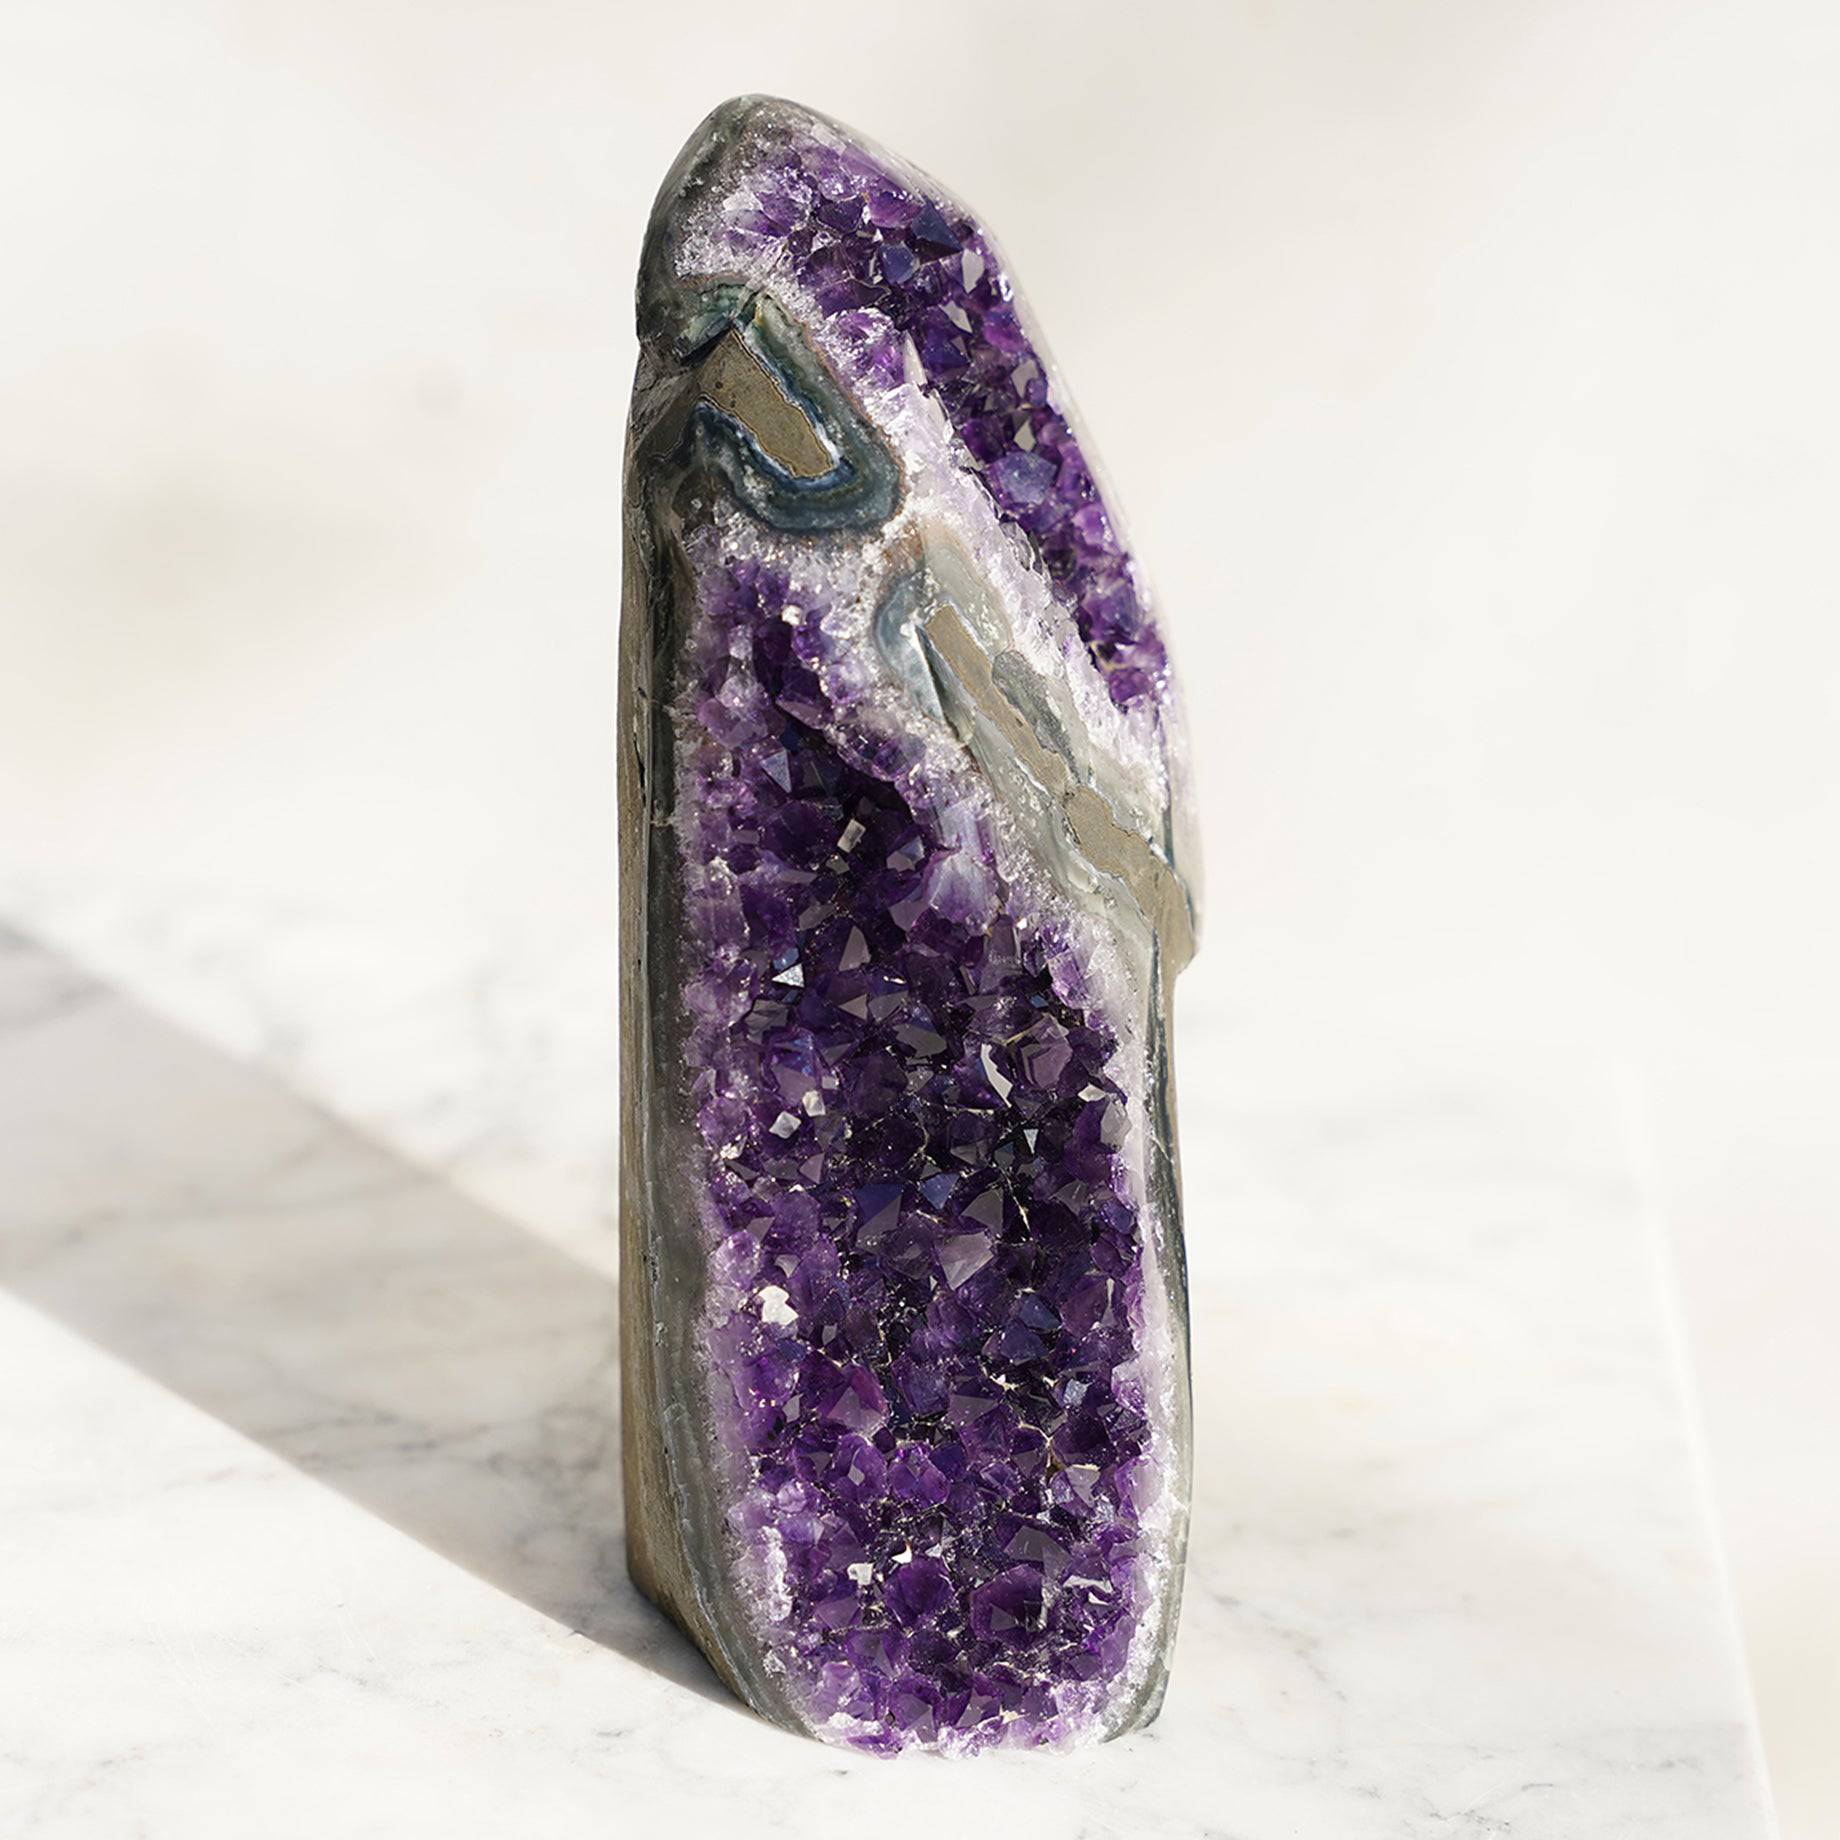 Unique Mineral Amethyst Geode Tower for sale - Deepest Earth